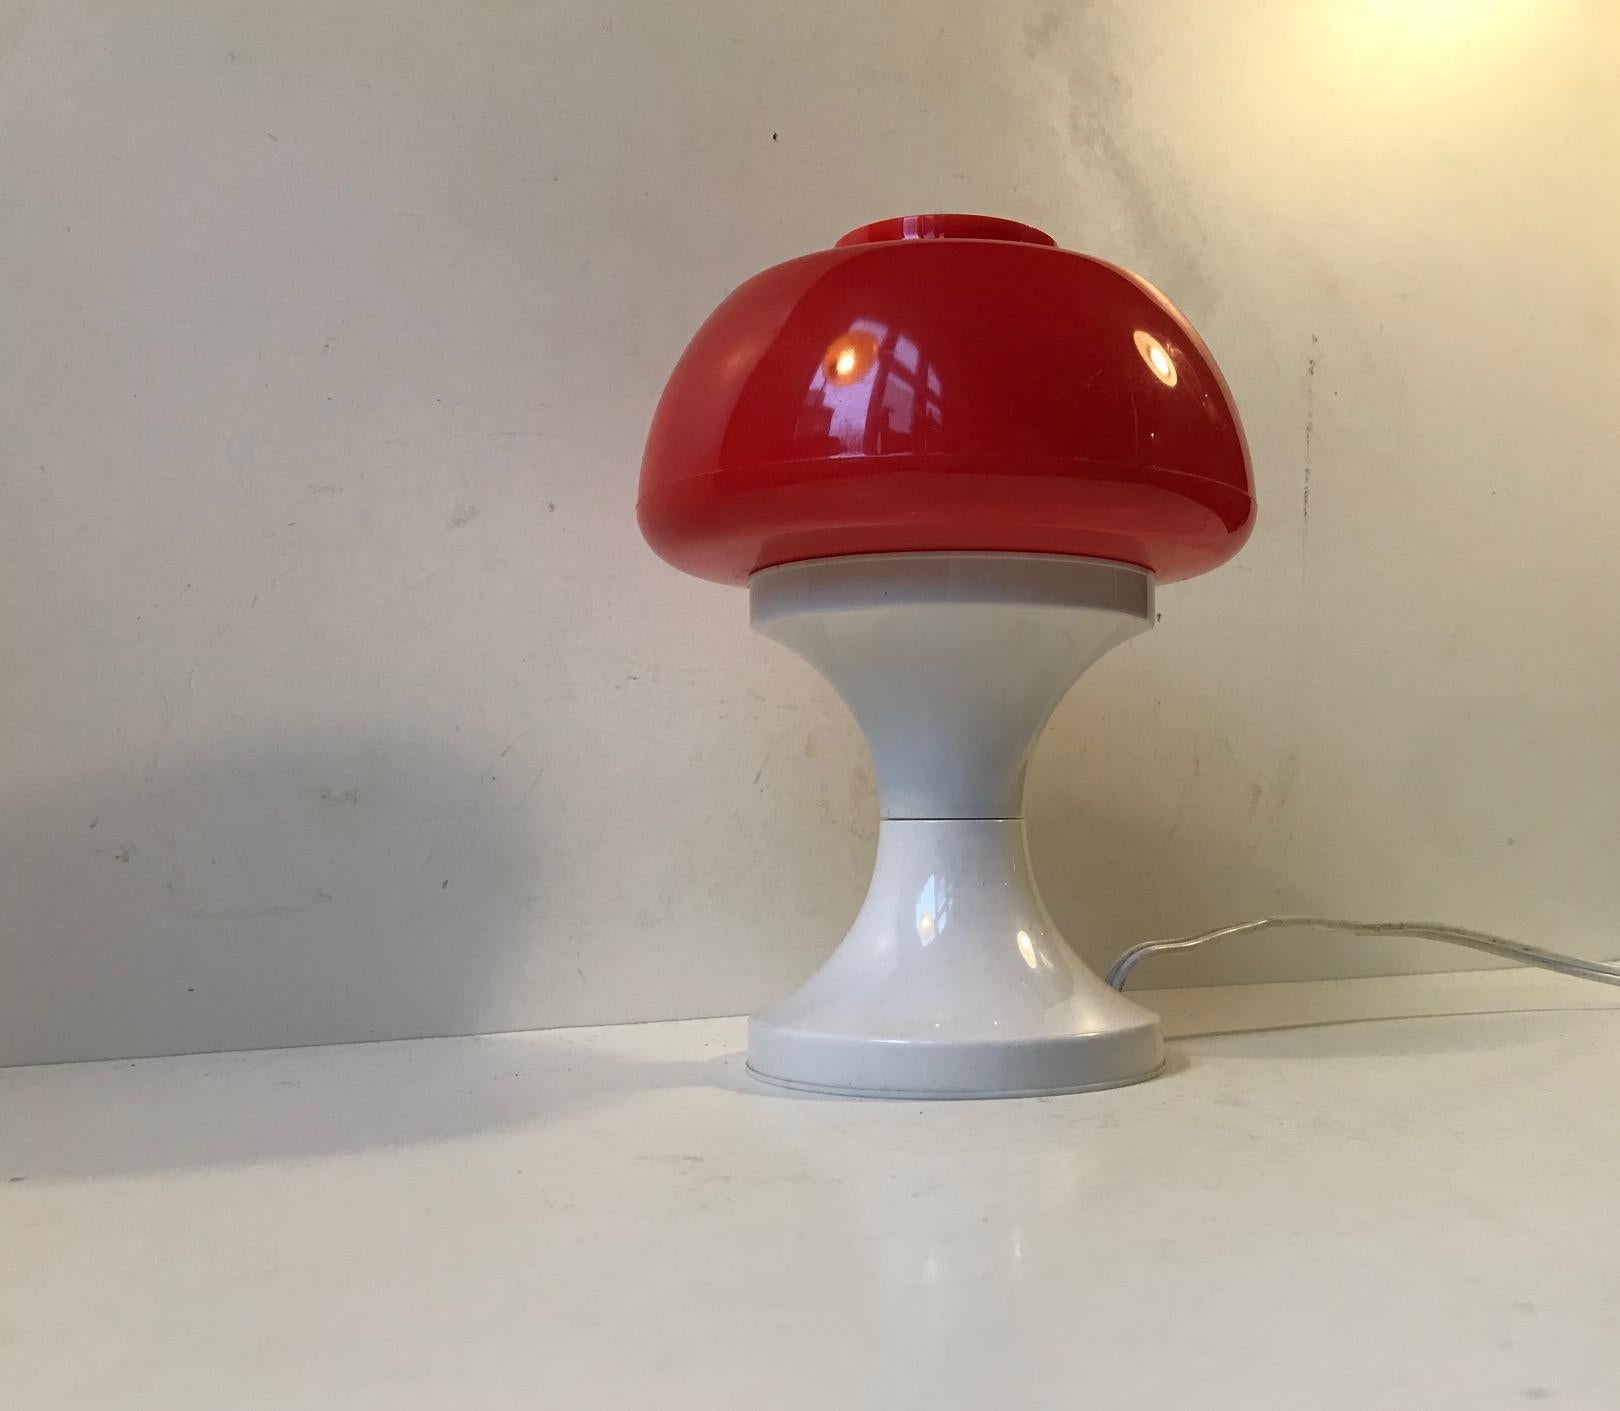 Small mushroom shaped table lamp made from shine through white and red acrylic. Manufactured by A. Schrøder in Denmark during the 1970s. Some believe its by Bent Karlby but it remains uncatalogued. This style of small table lights were popularized